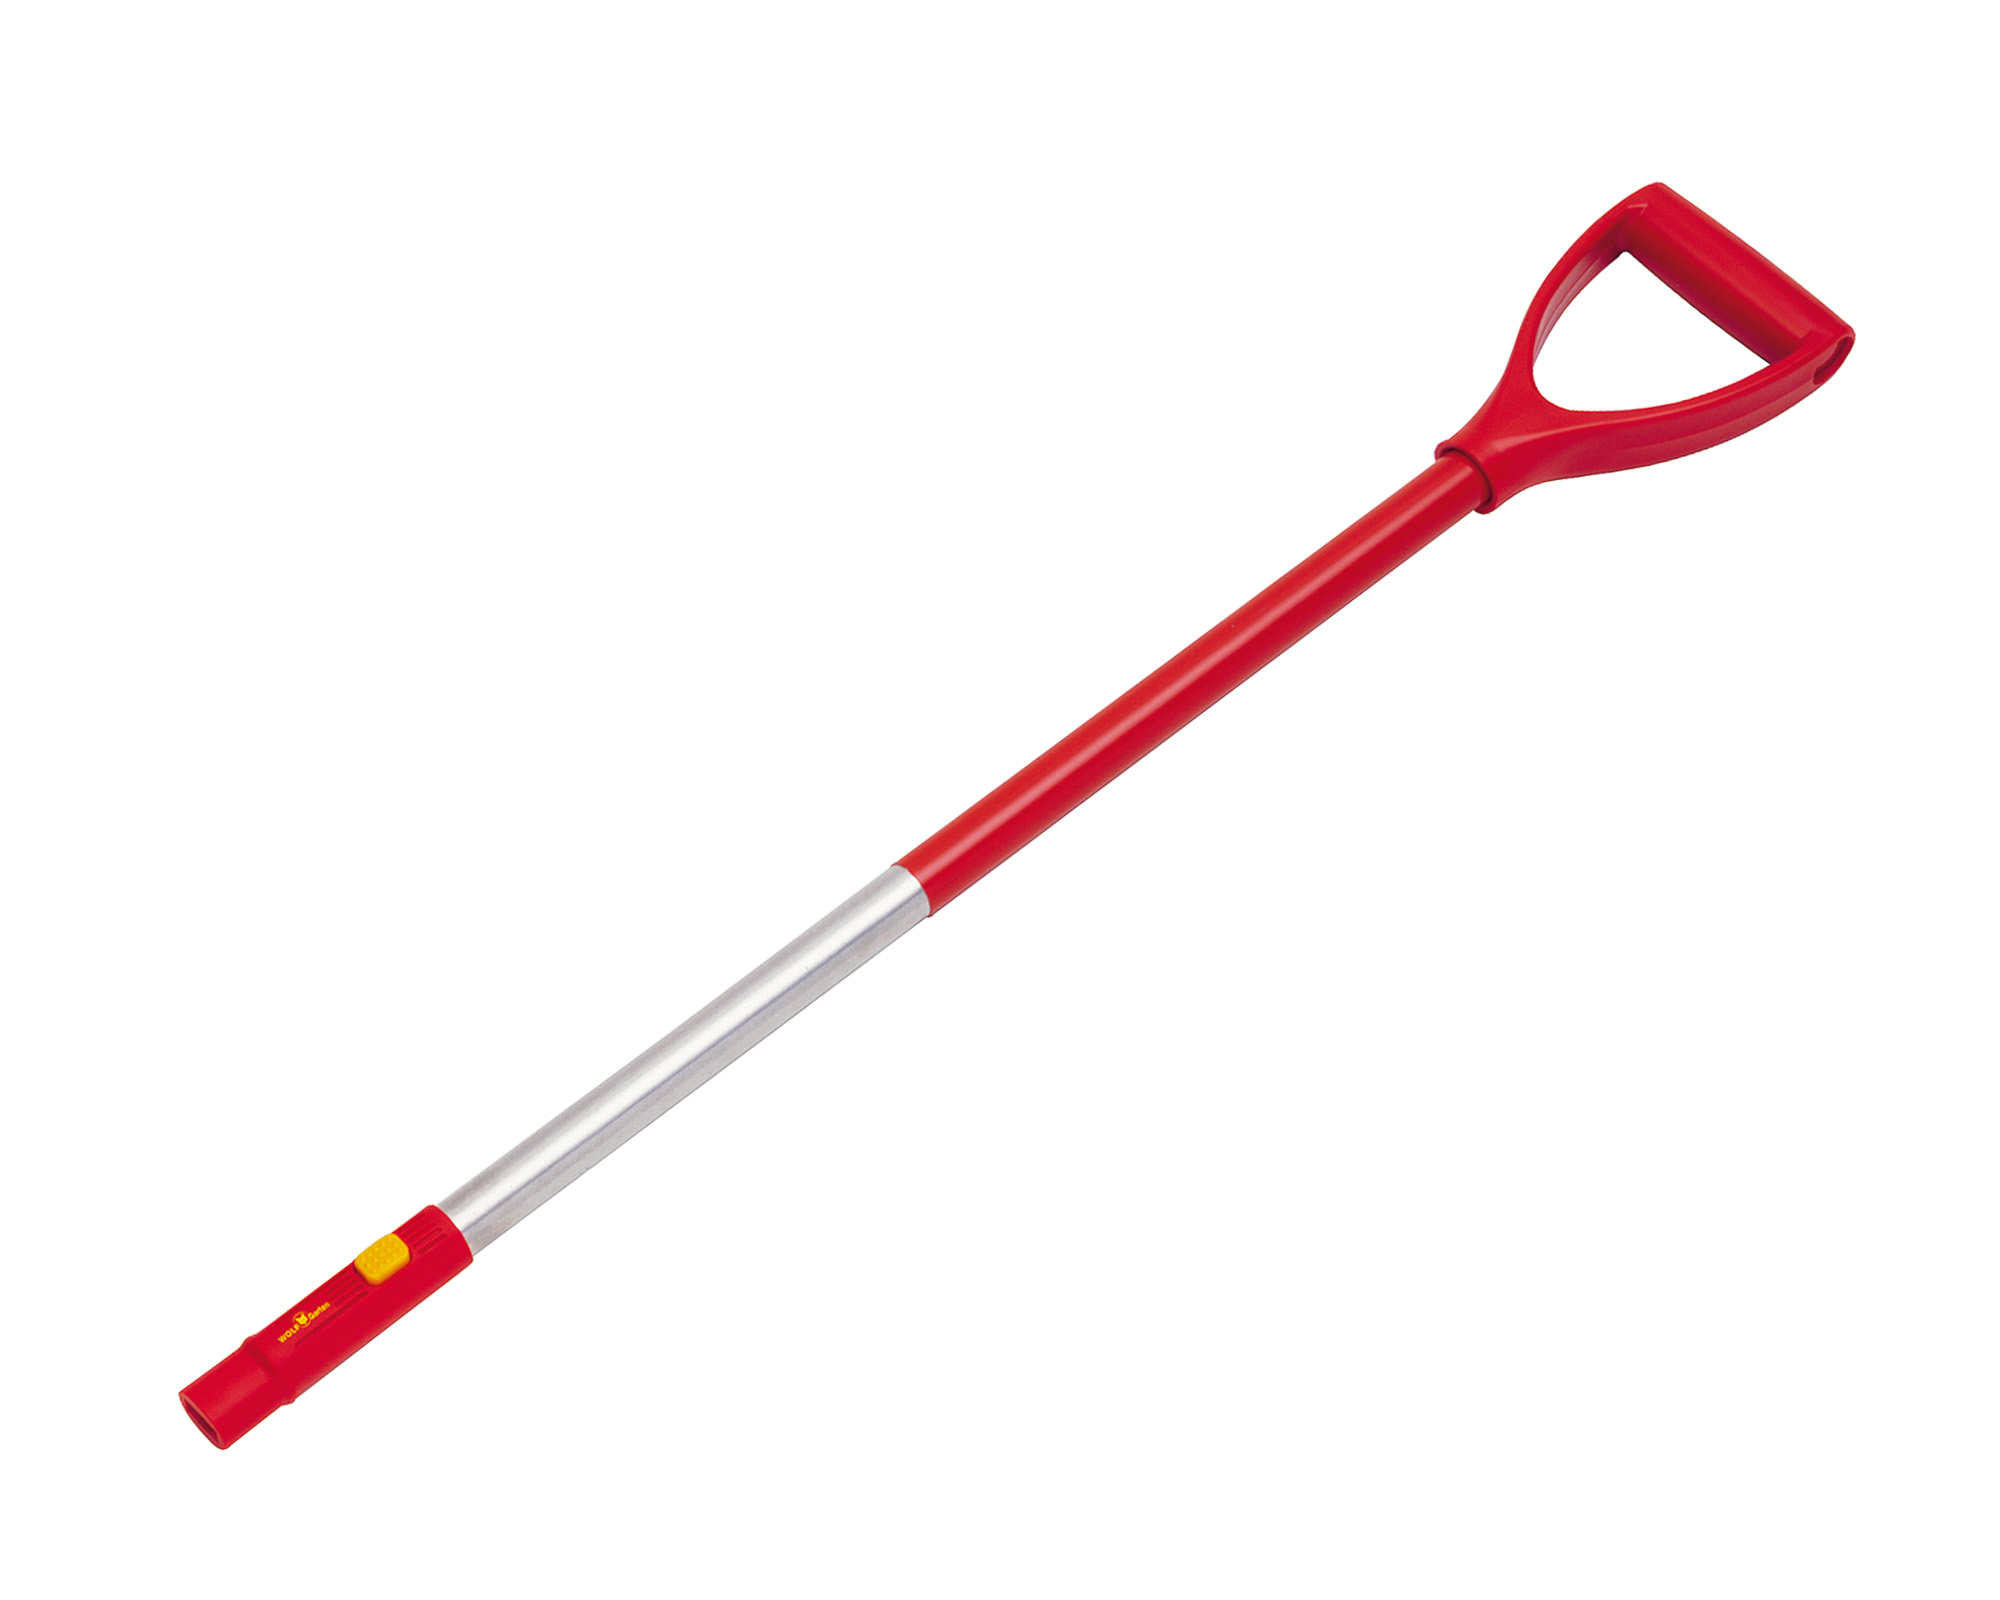 Recommended handle for KS-M –  ZM-AD Aluminium 85cm with D grip.